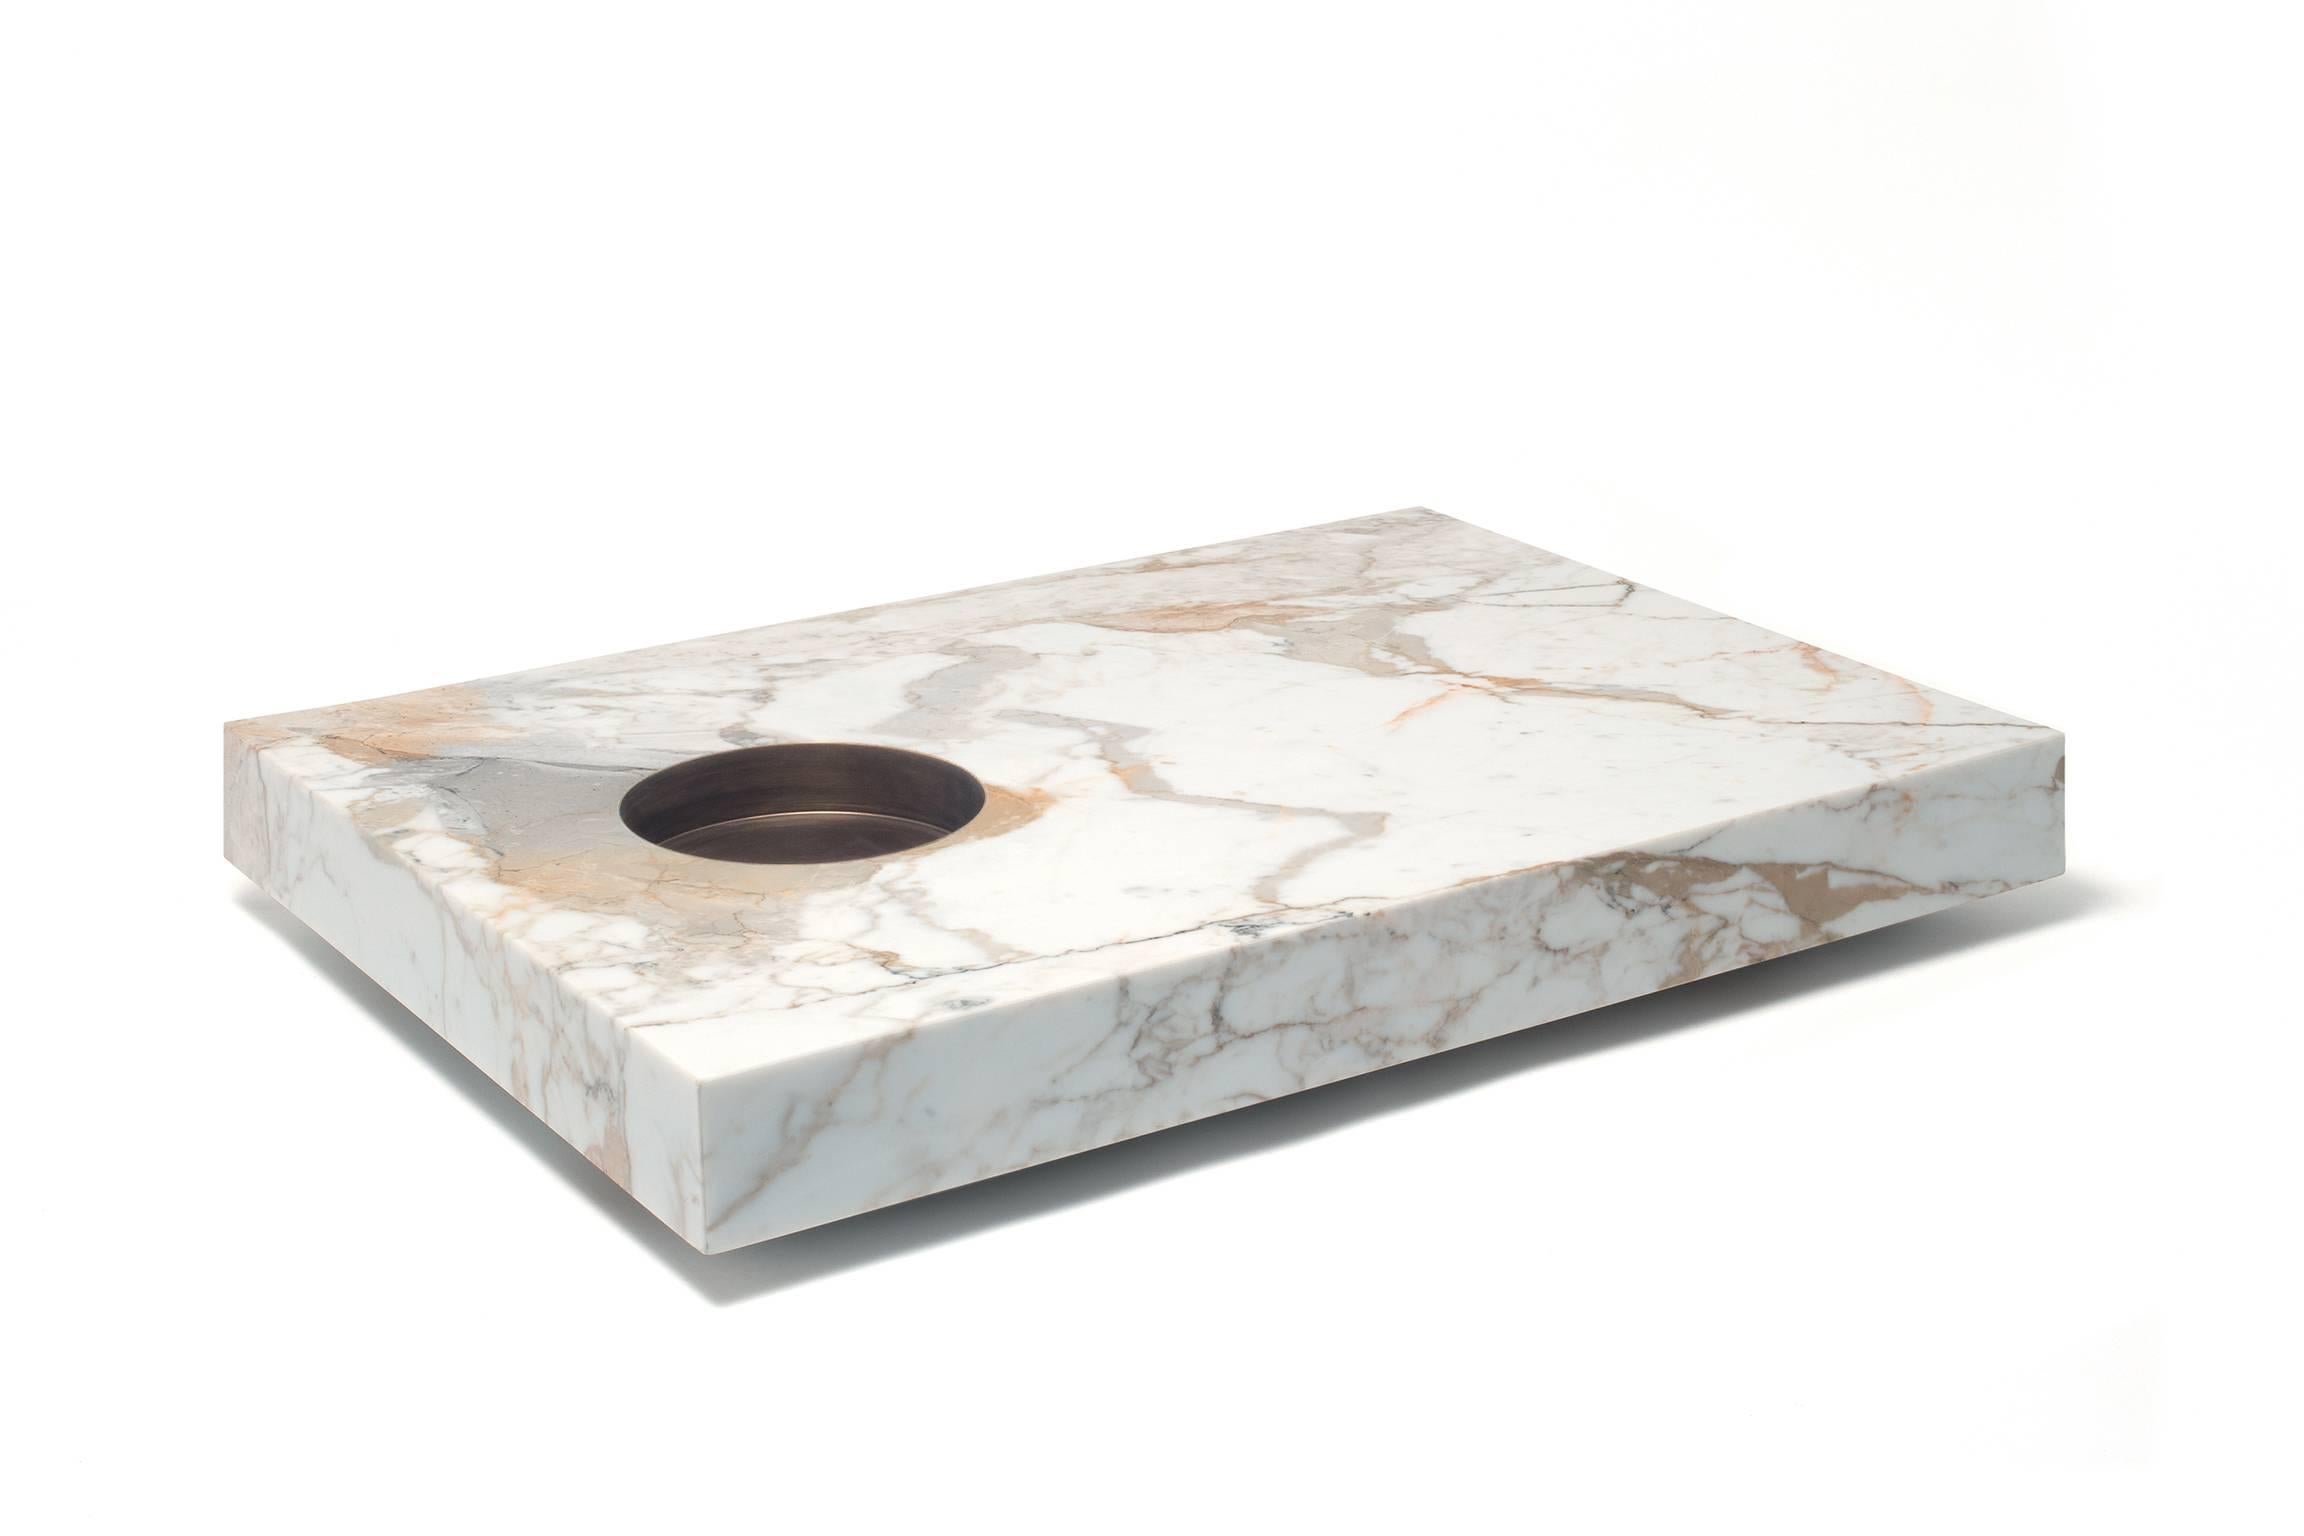  What we observe is often deceiving, it conceals itself and avoids being truly seen. Belingardi Clusoni demands a coffee table that regards us and lets itself be regarded, a silent eye that knows how to welcome and bestow. A Marble plane in